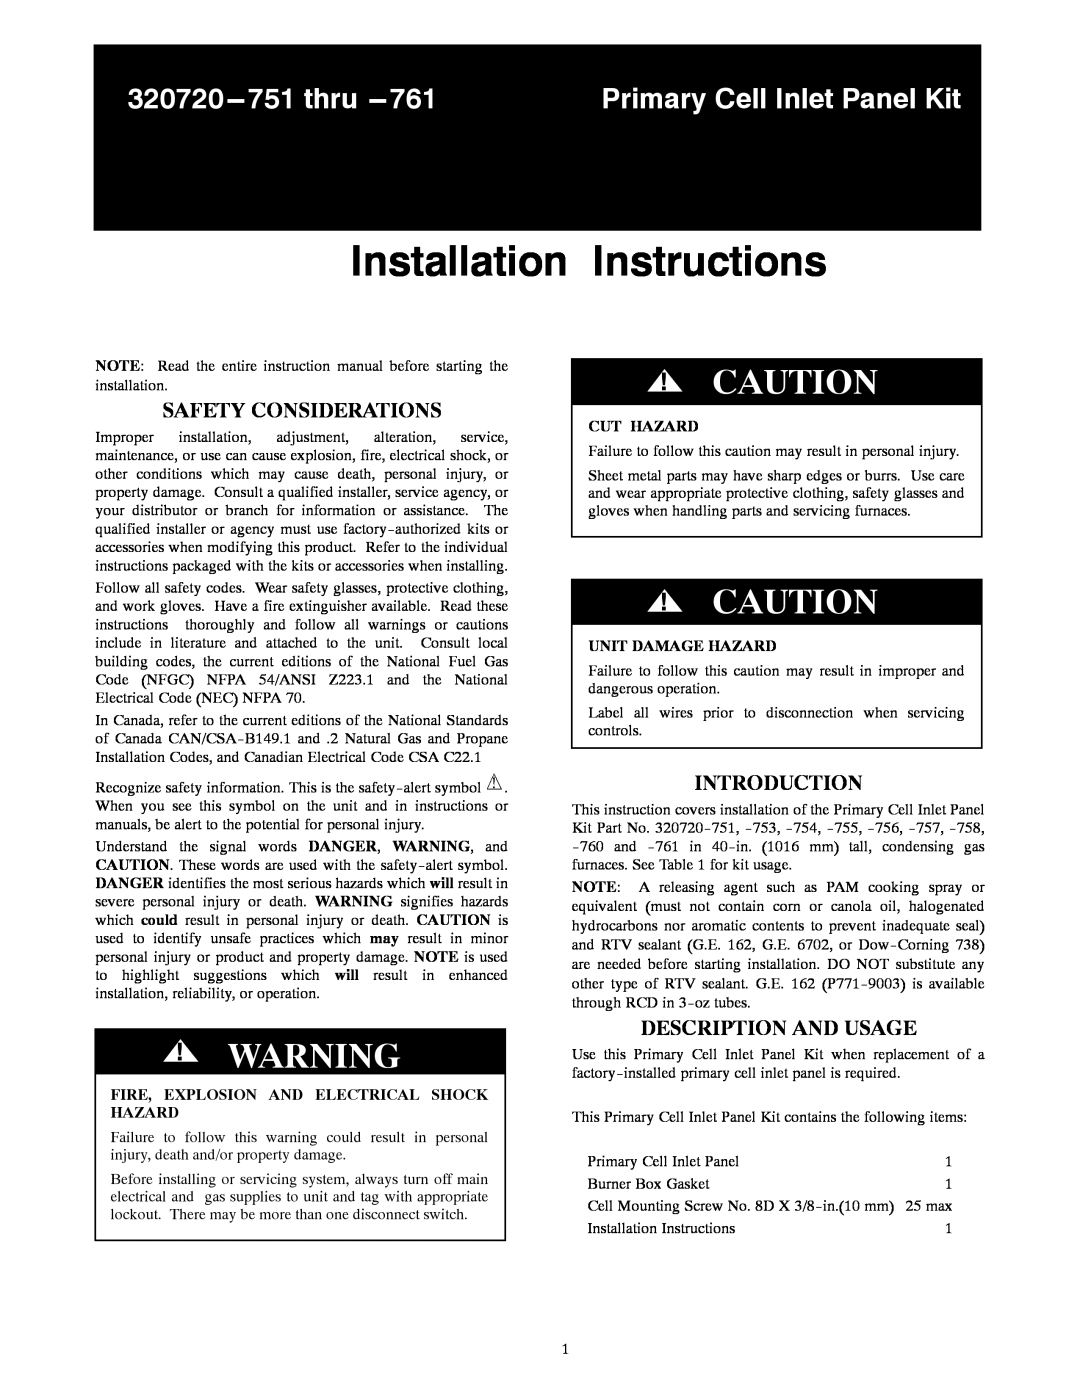 Carrier 320720---751 THRU ---761 installation instructions Safety Considerations, Introduction, Description And Usage 